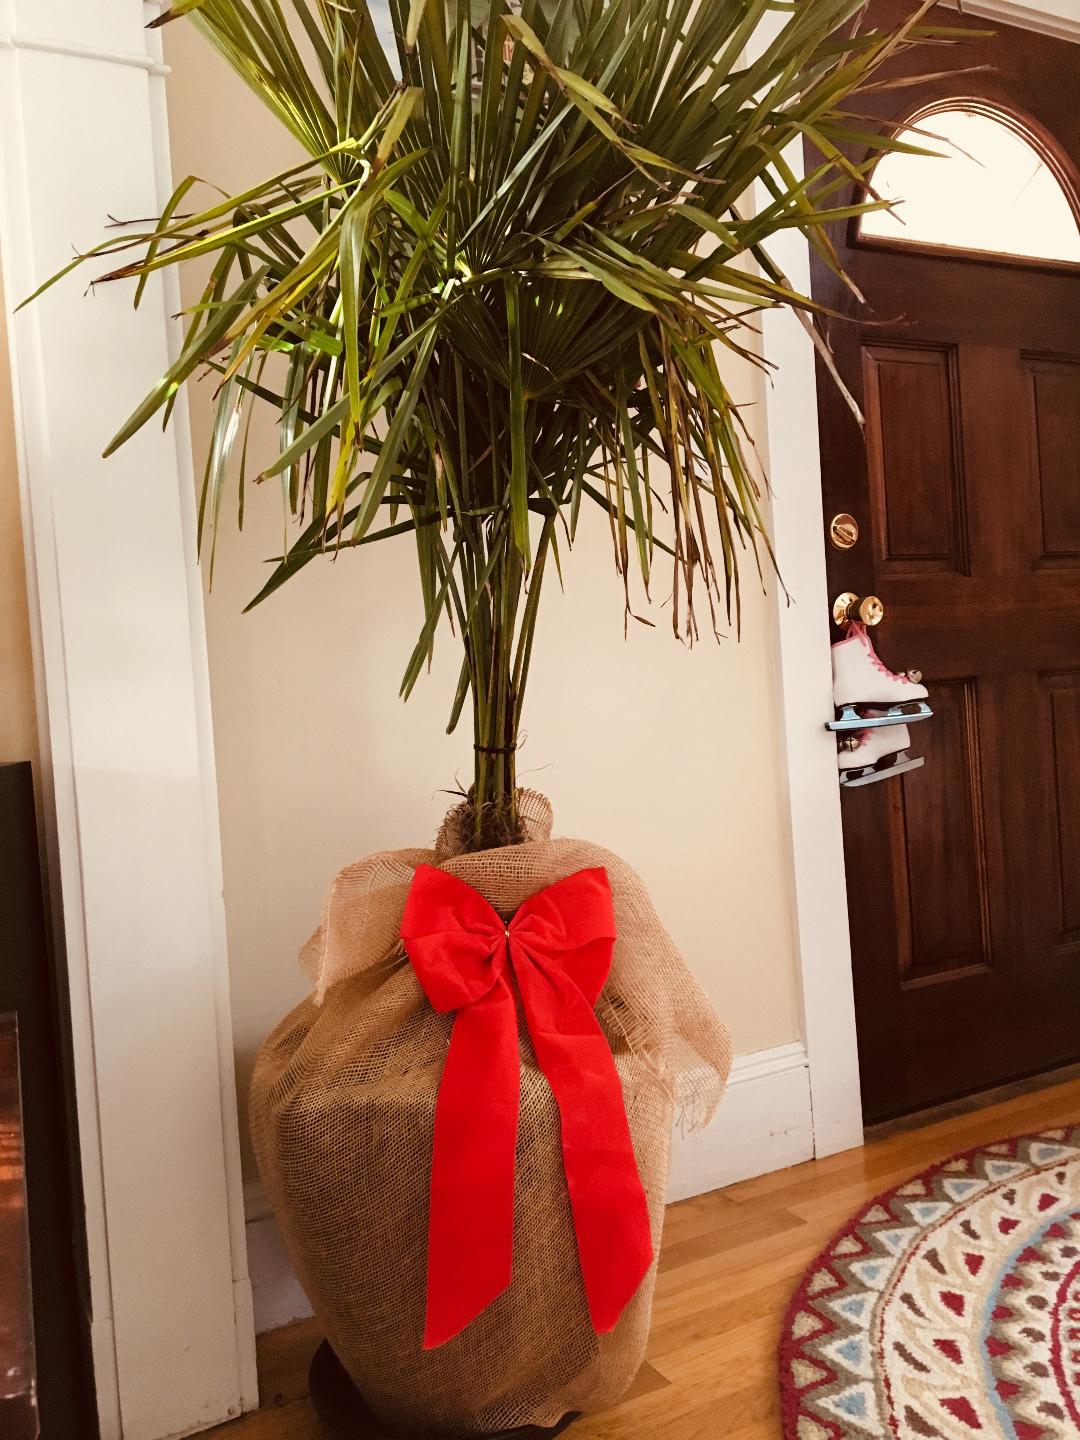 DIY solution to childproofing and pet-proofing houseplants for under $10 #childproofing #indoorplants #burlap #pets #weedbarrierfabric